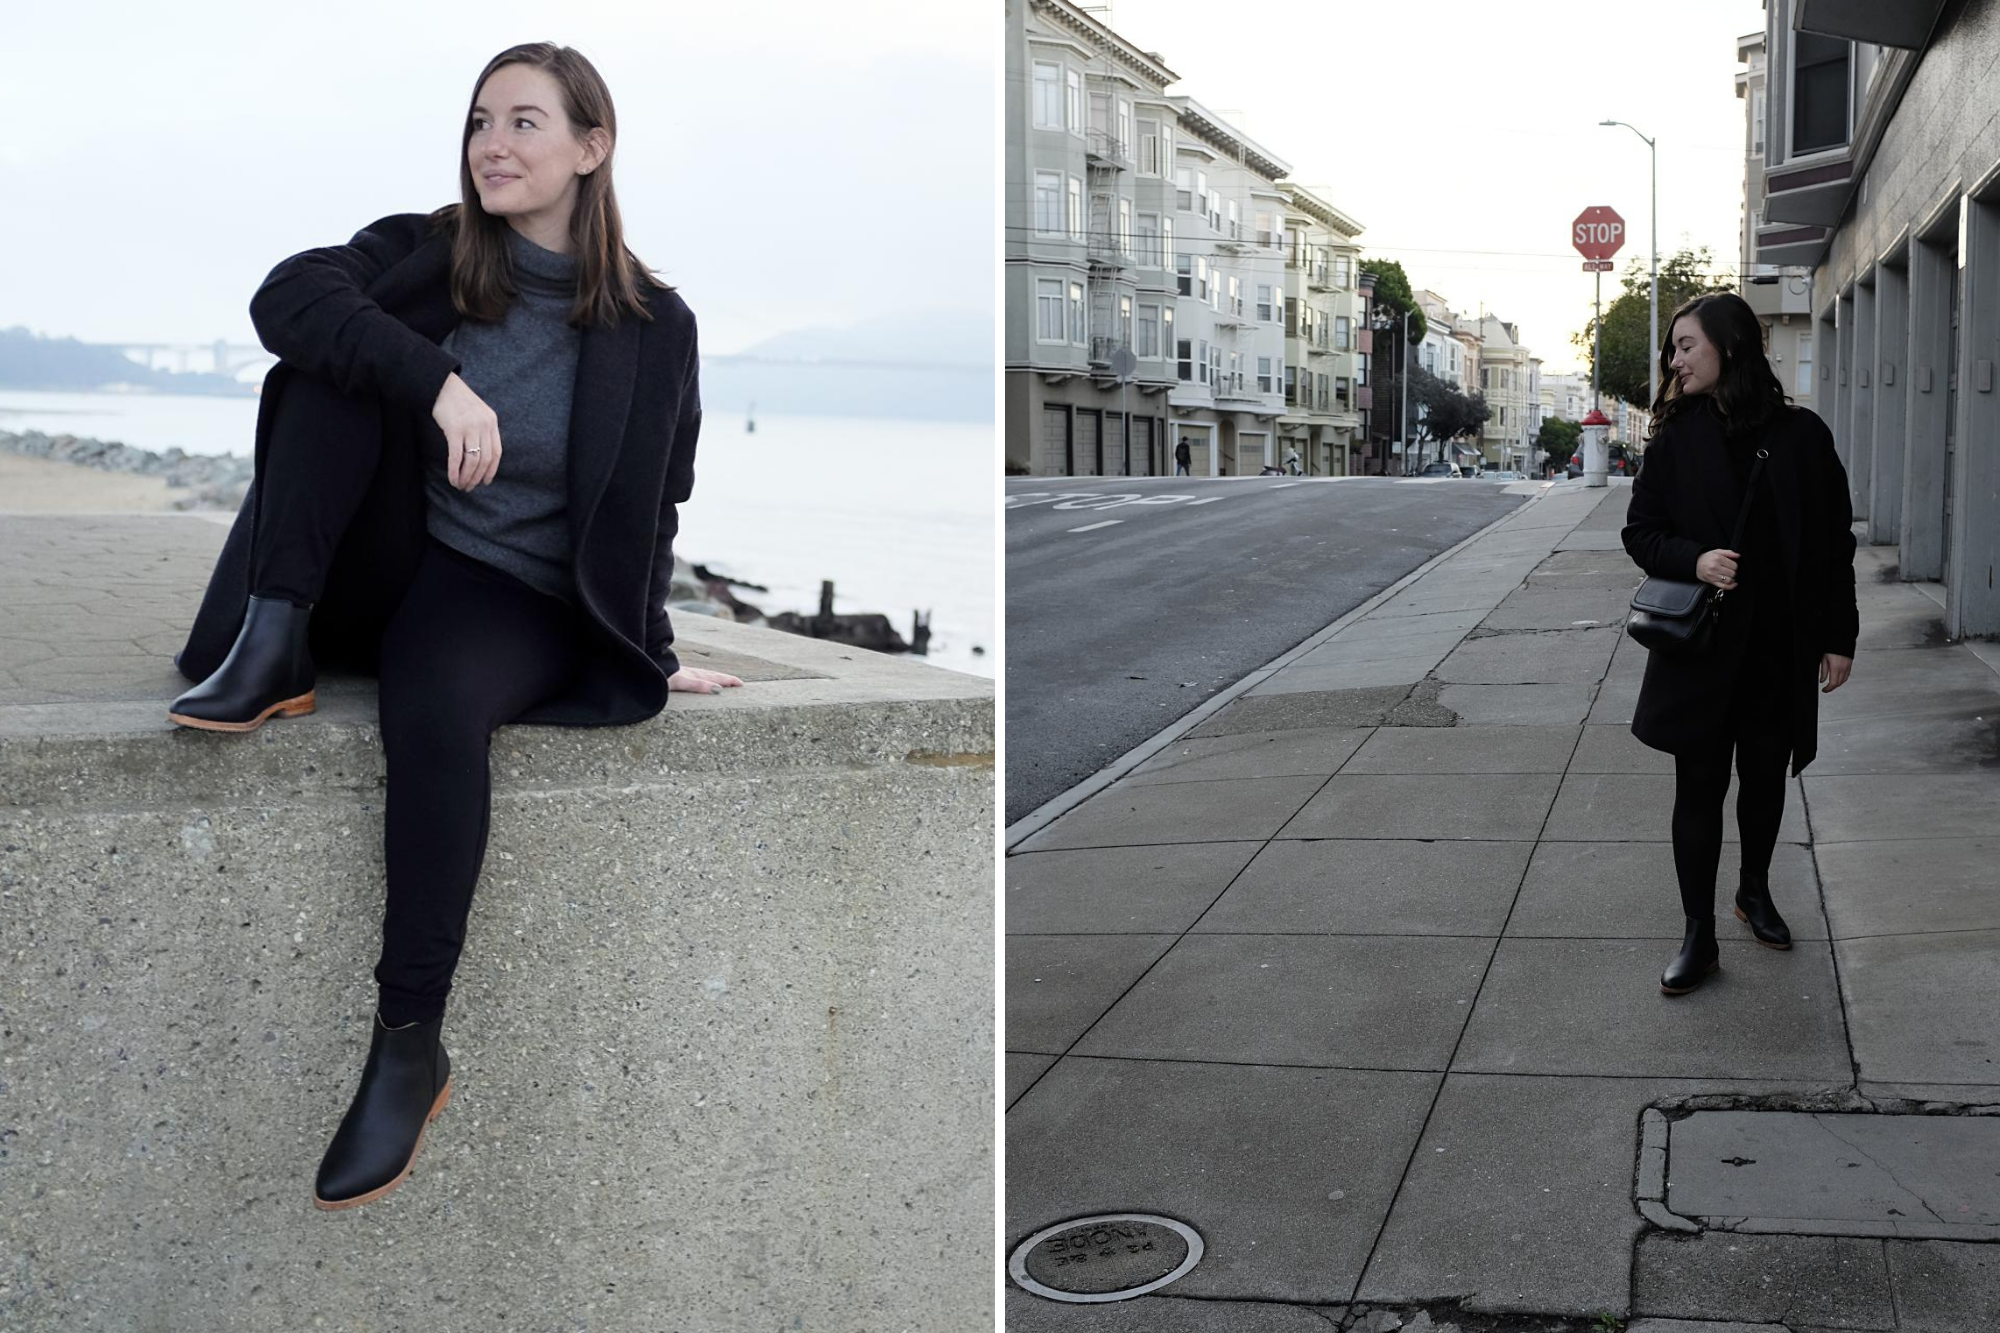 Two images. Image one: Alyssa sitting on a concrete wall in front of the golden gate bridge, wearing a grey sweater, black pants, black boots, and a charcoal coat. Image two: Alyssa standing on a street sidewalk wearing all black